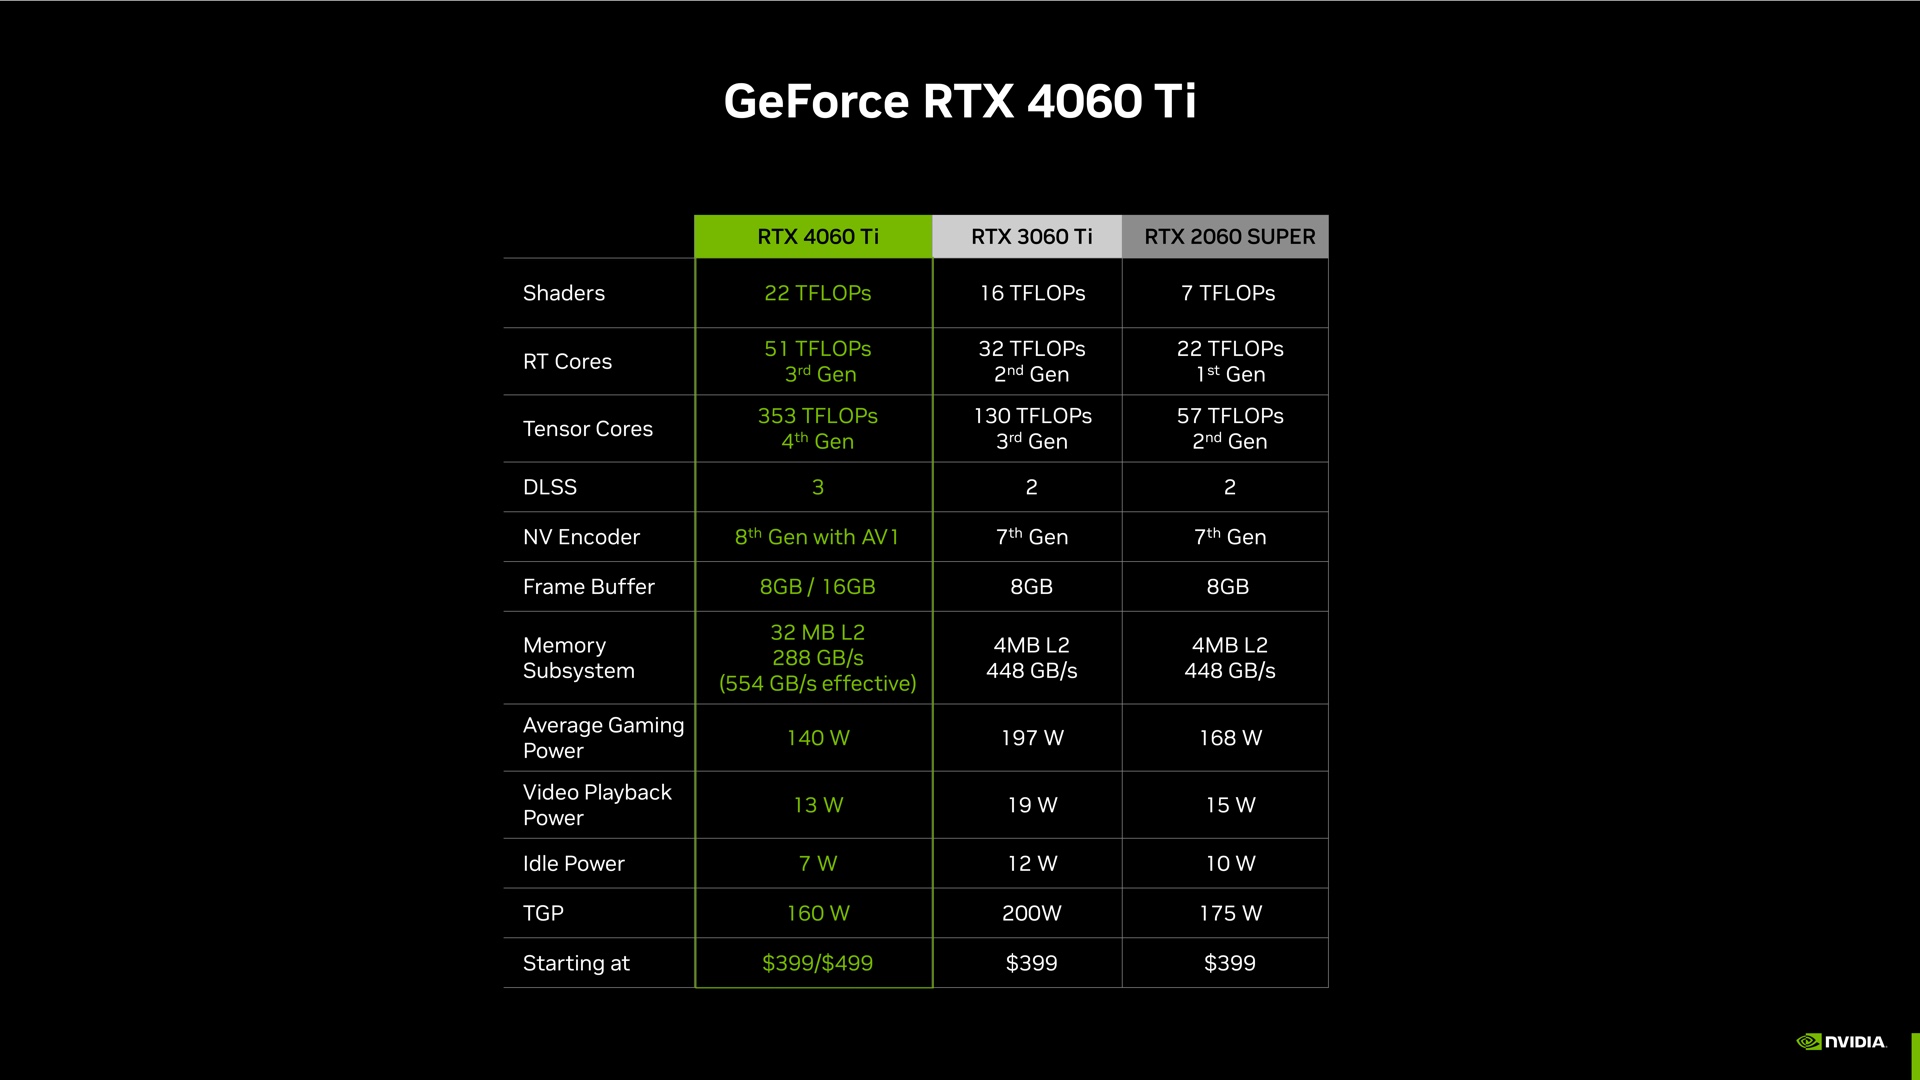 Nvidia's press briefing used TFLOP numbers instead of the number of cores or memory bus width here, since the numbers don't look very flattering out of context.